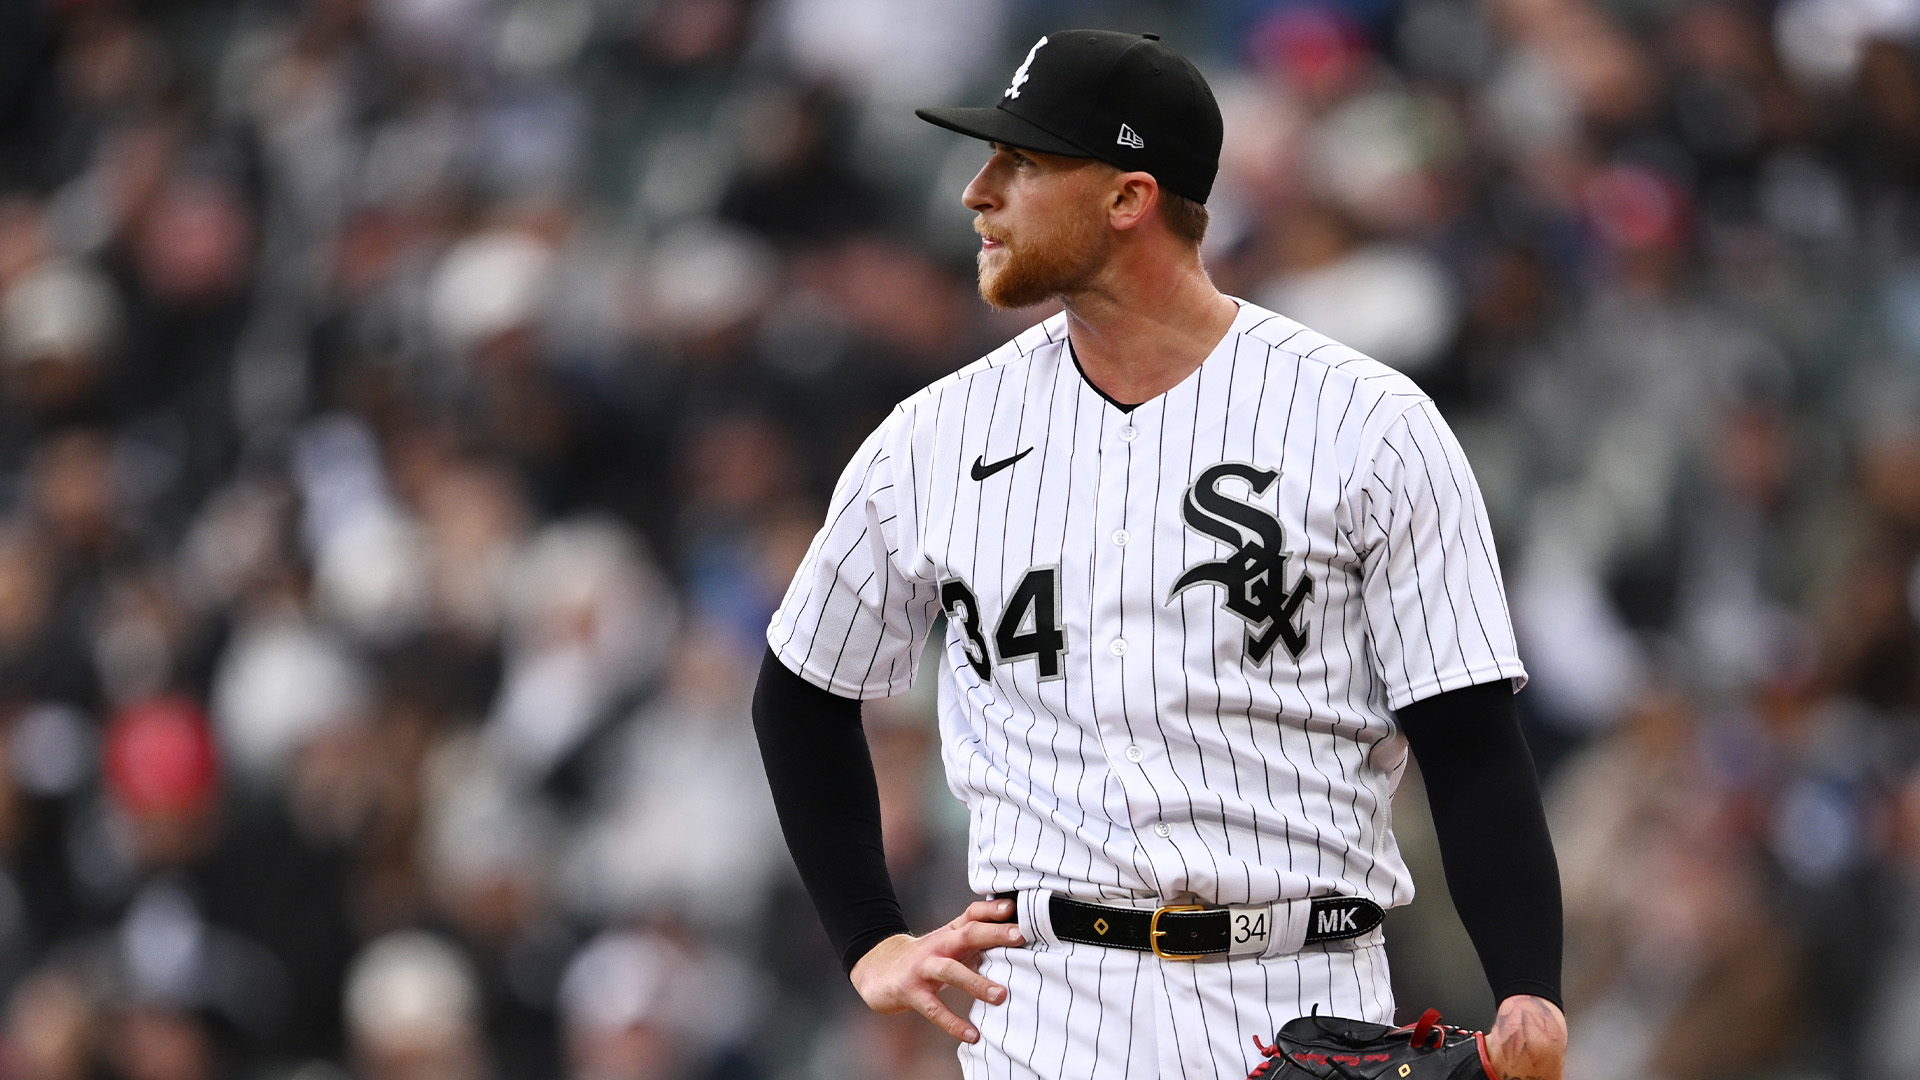 Michael Kopech wants to carry his share of White Sox' pitching